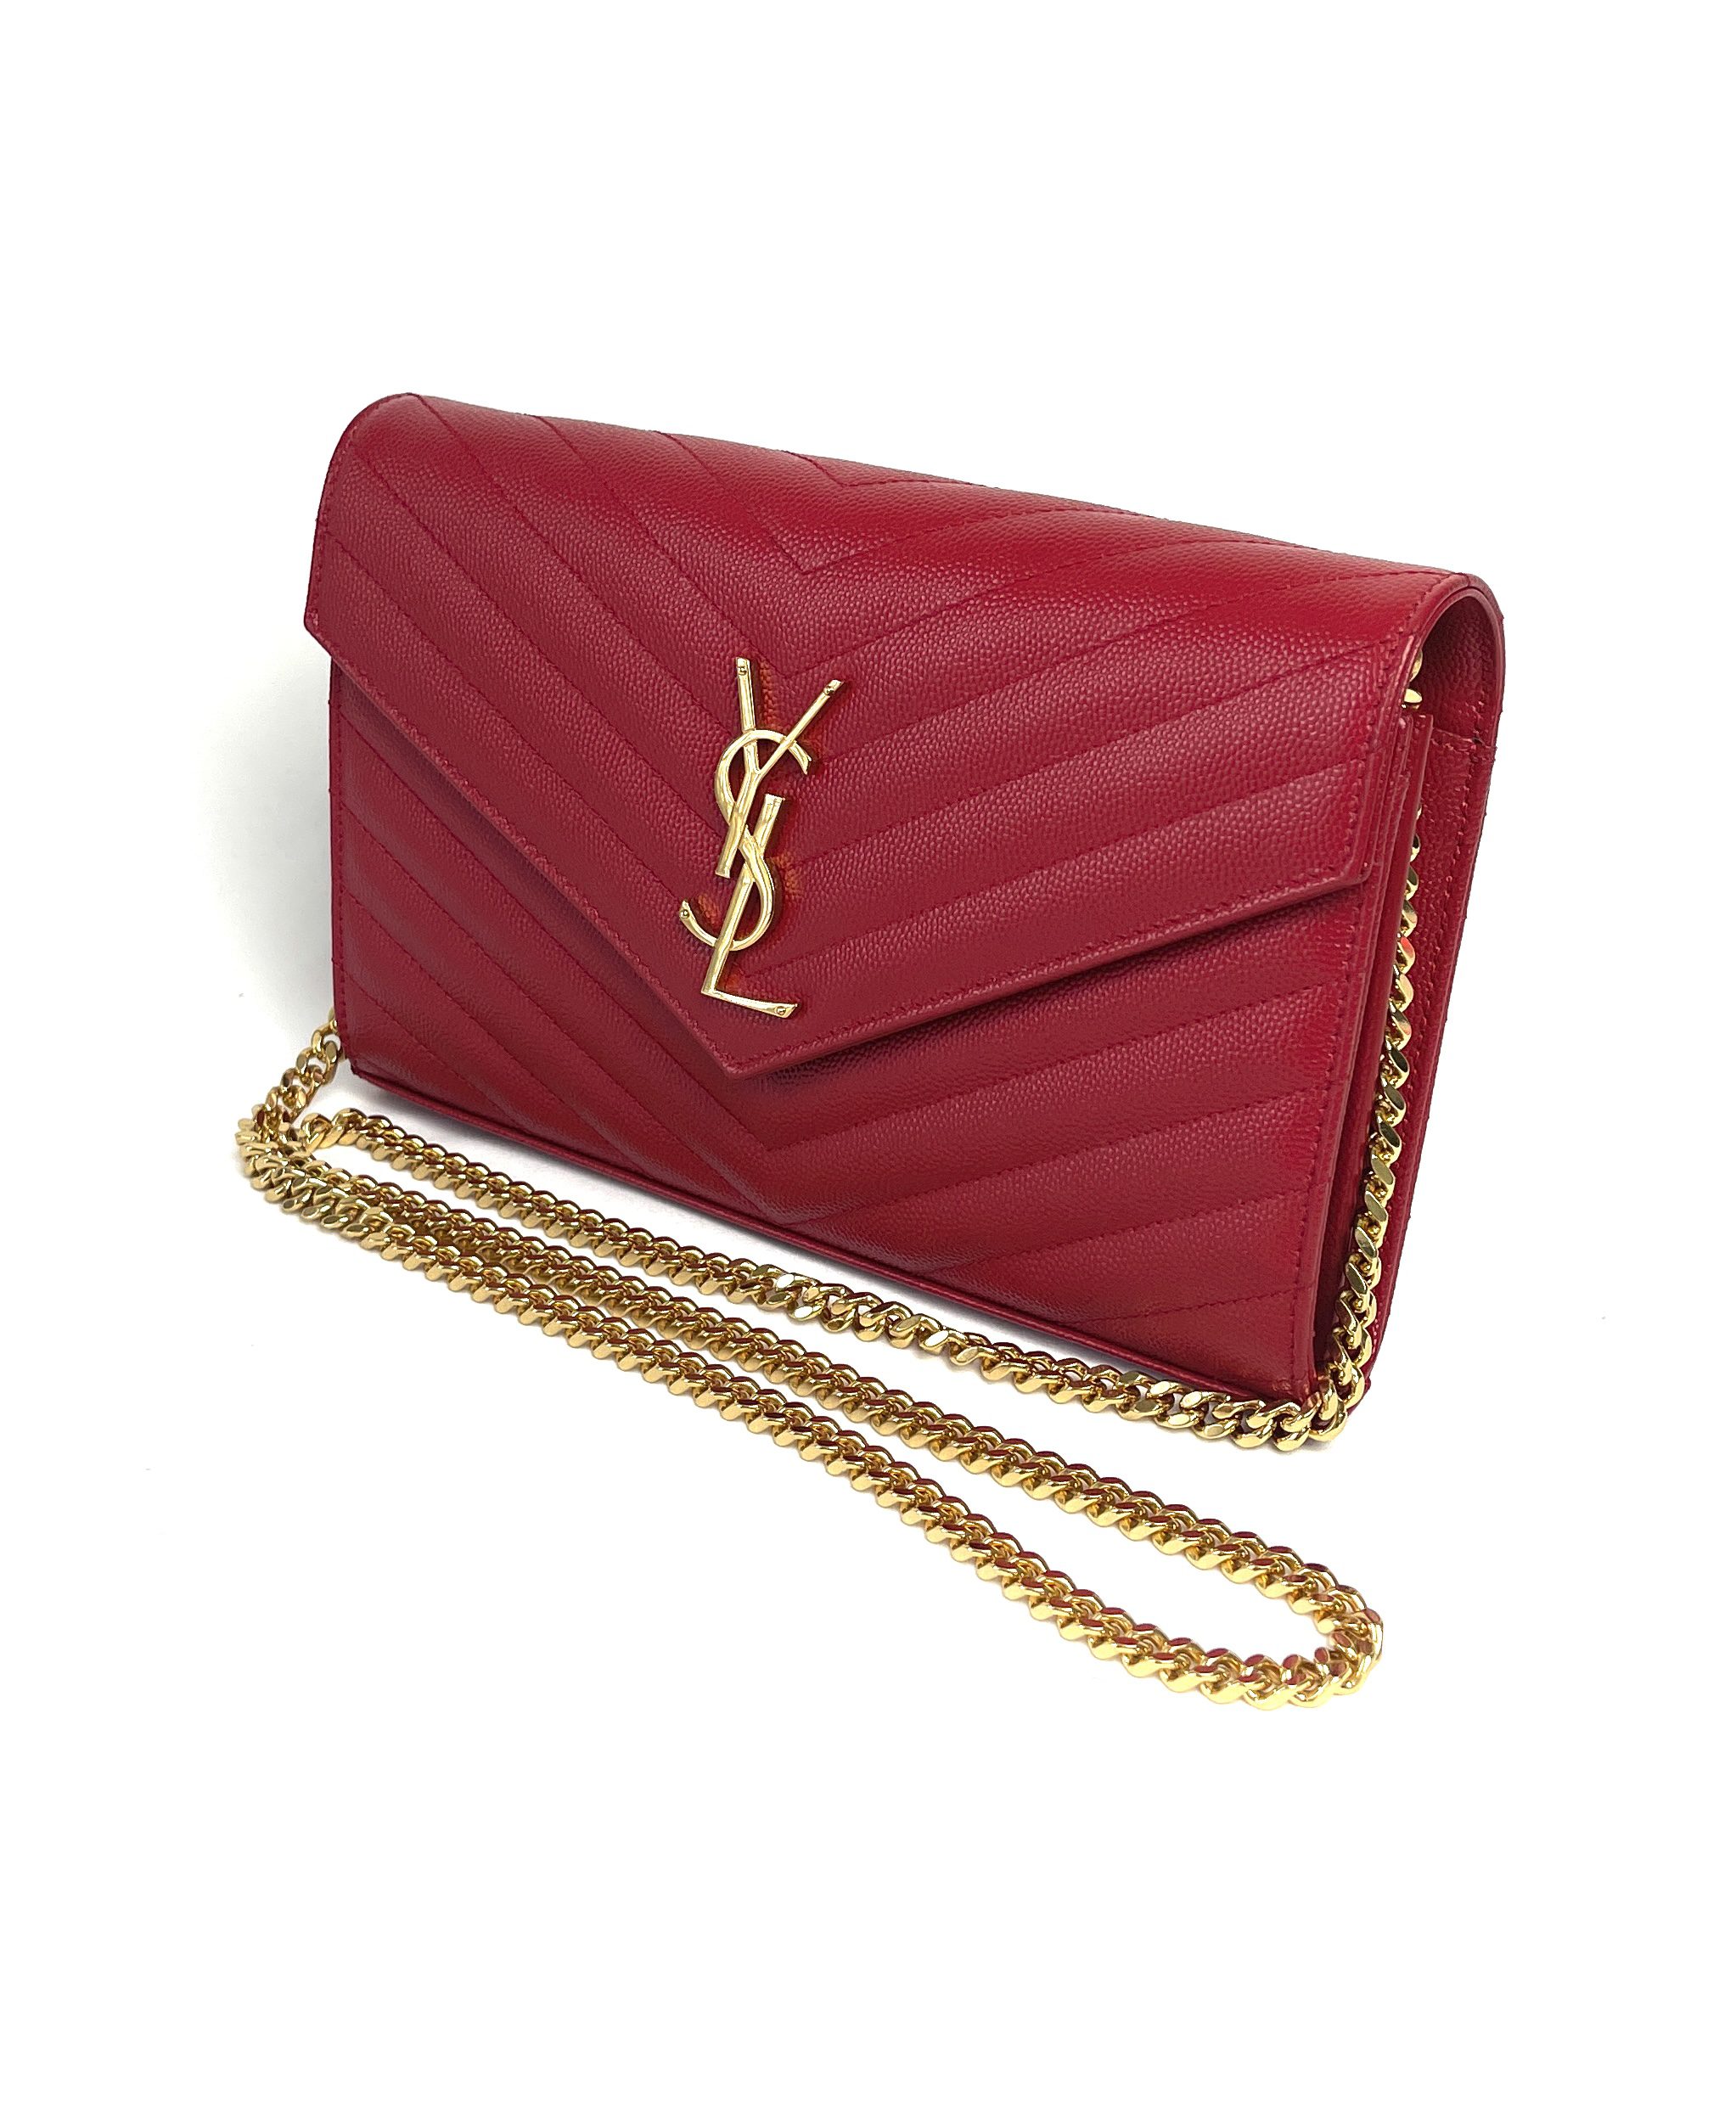 YSL Envelope Chain Wallet in Grain De Poudre Embossed Leather,Red,retail  $1350